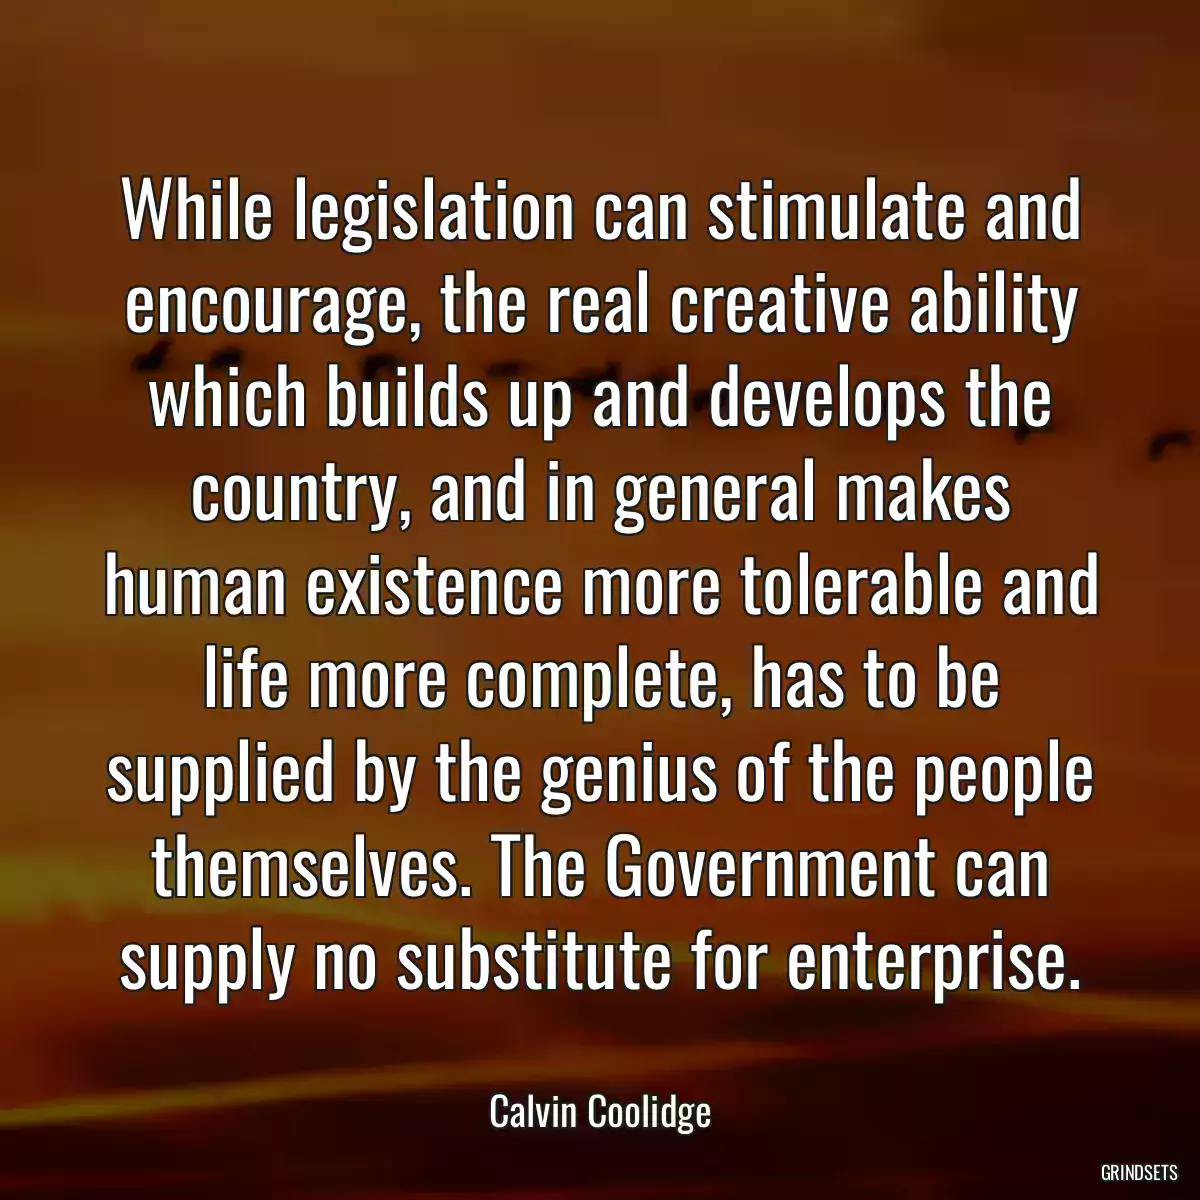 While legislation can stimulate and encourage, the real creative ability which builds up and develops the country, and in general makes human existence more tolerable and life more complete, has to be supplied by the genius of the people themselves. The Government can supply no substitute for enterprise.